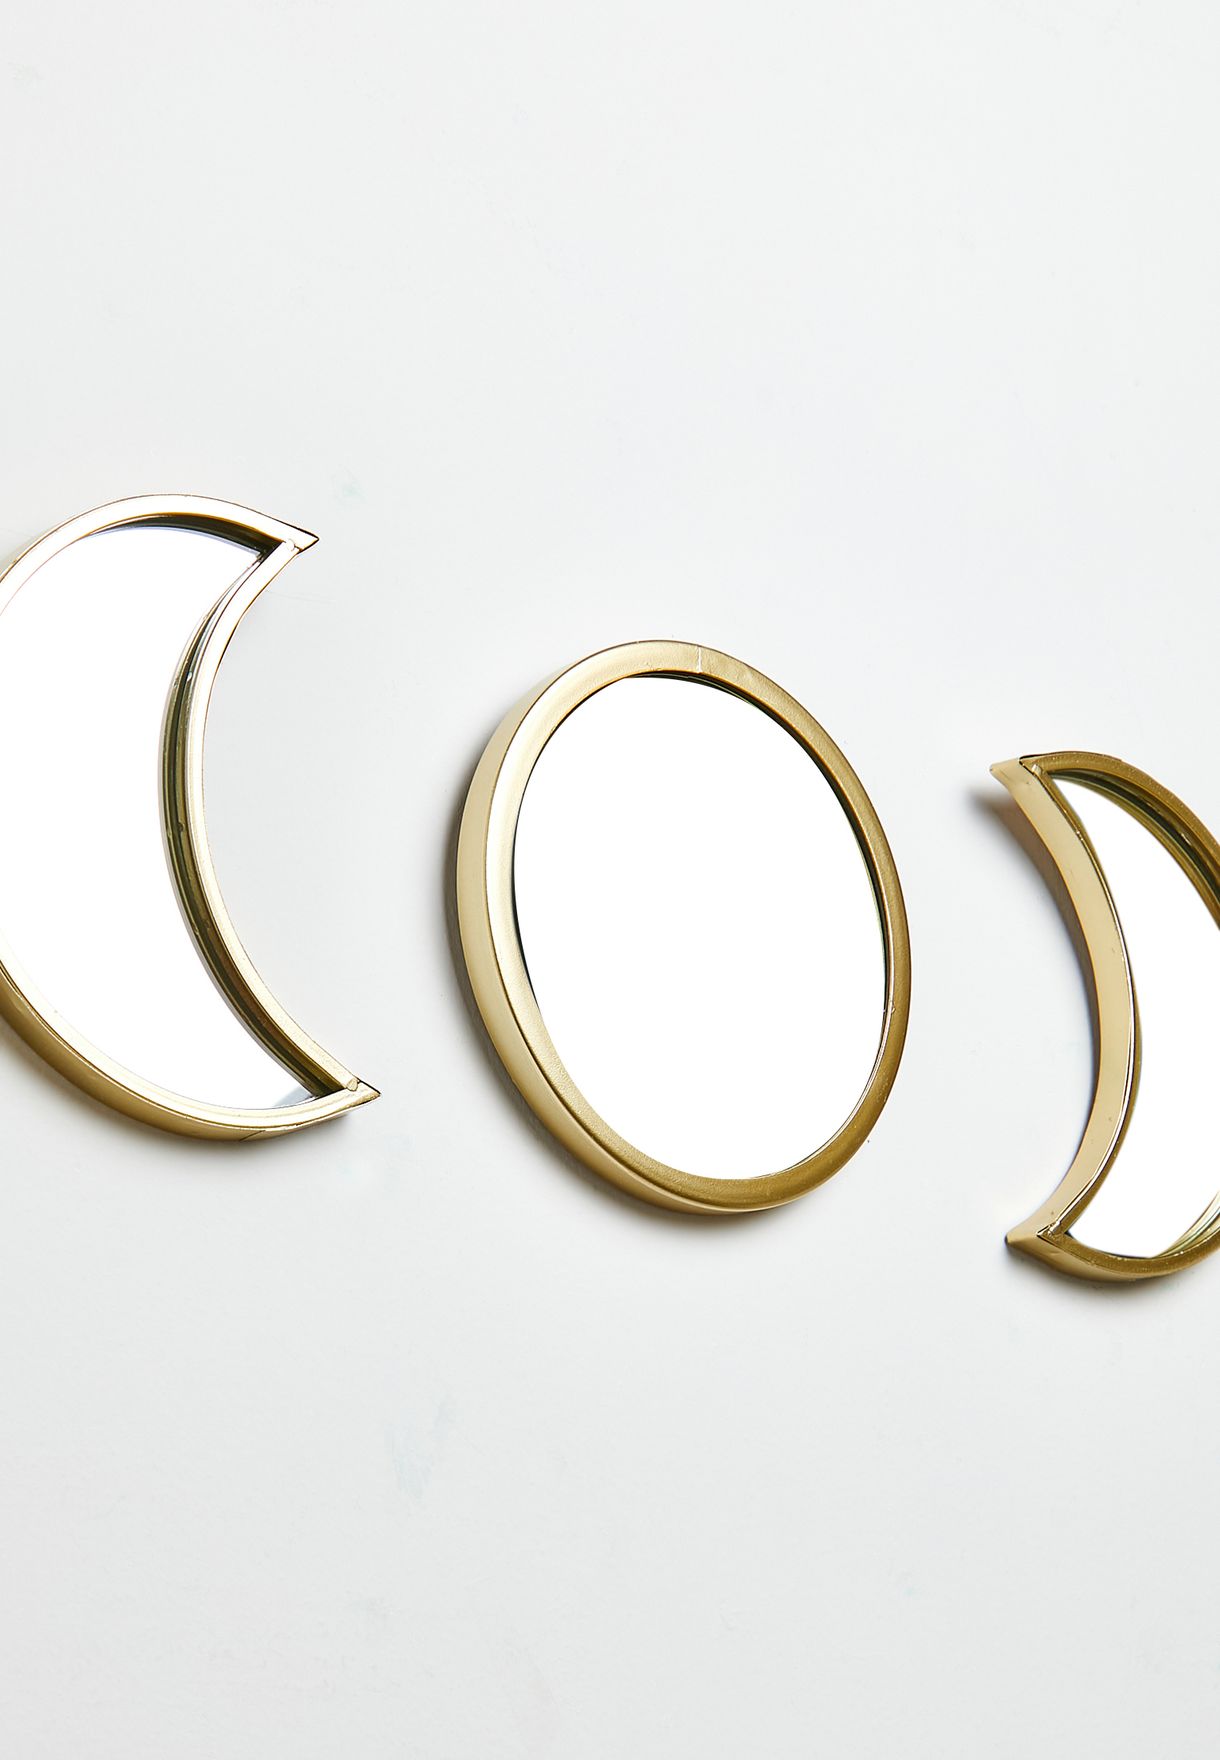 Moon Phases Gold Mirror - Set Of 3